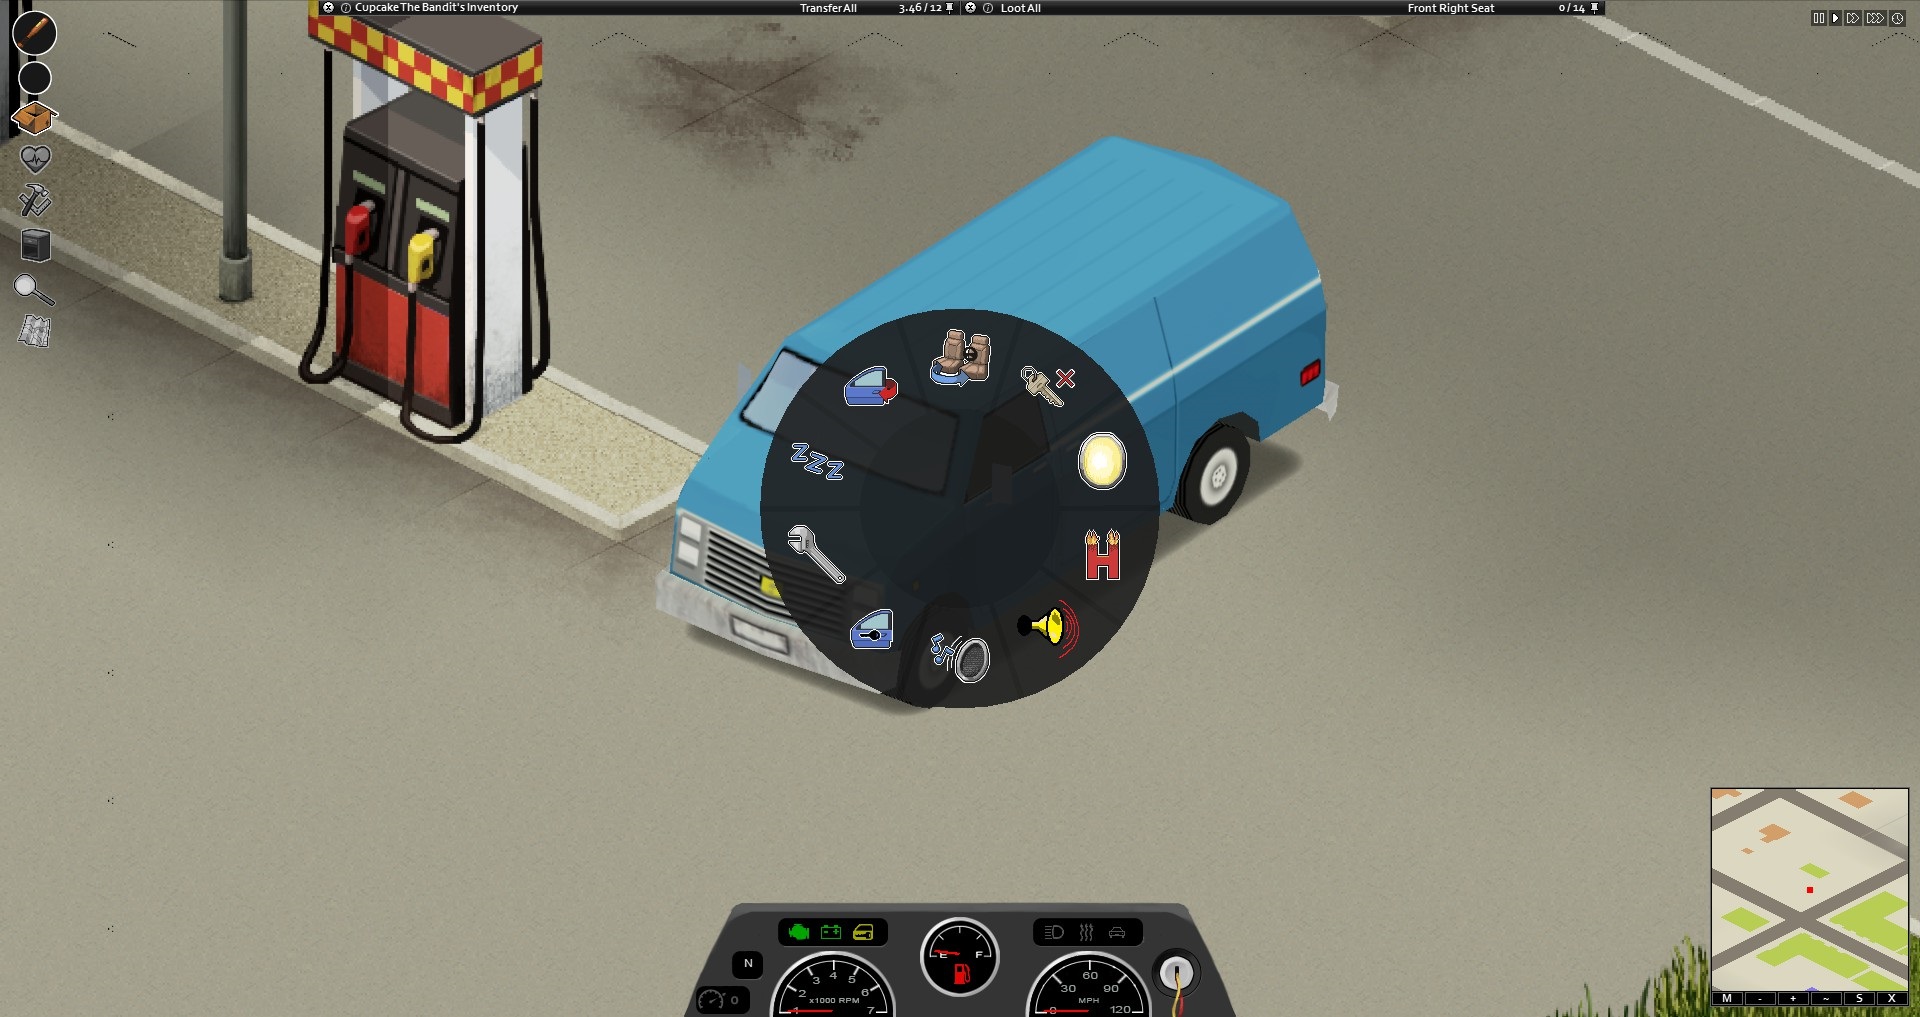 Project Zomboid - A car radial menu and dashboard are visible.